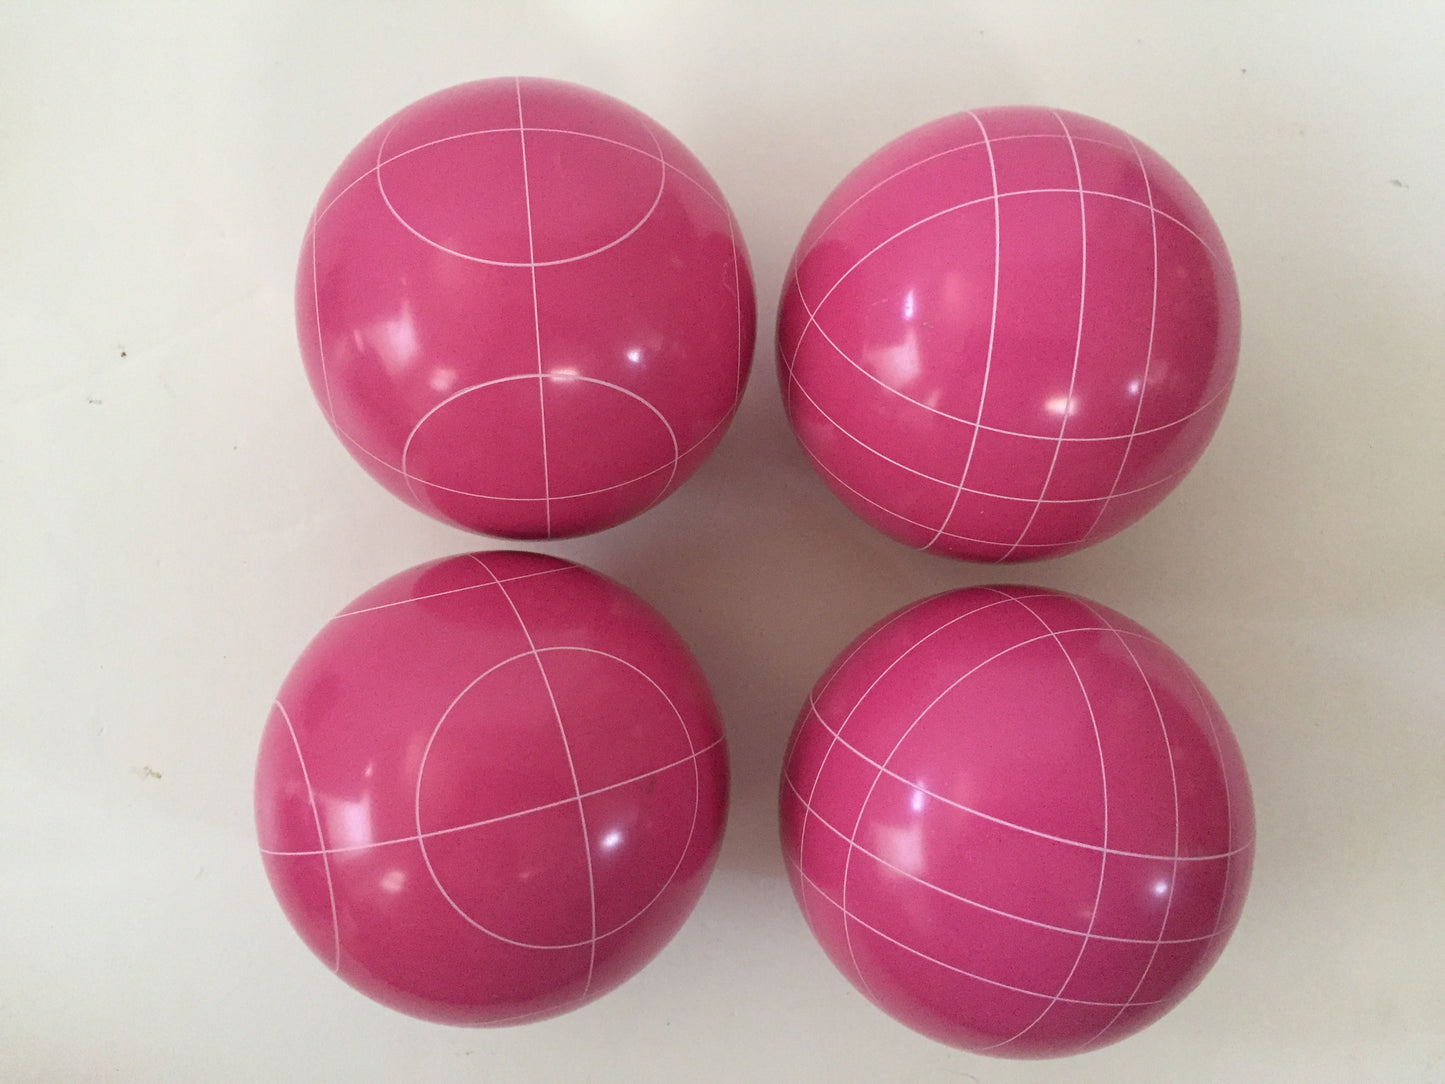 107mm 4 pack Bocce Balls  - Pink with 2 different scoring patterns